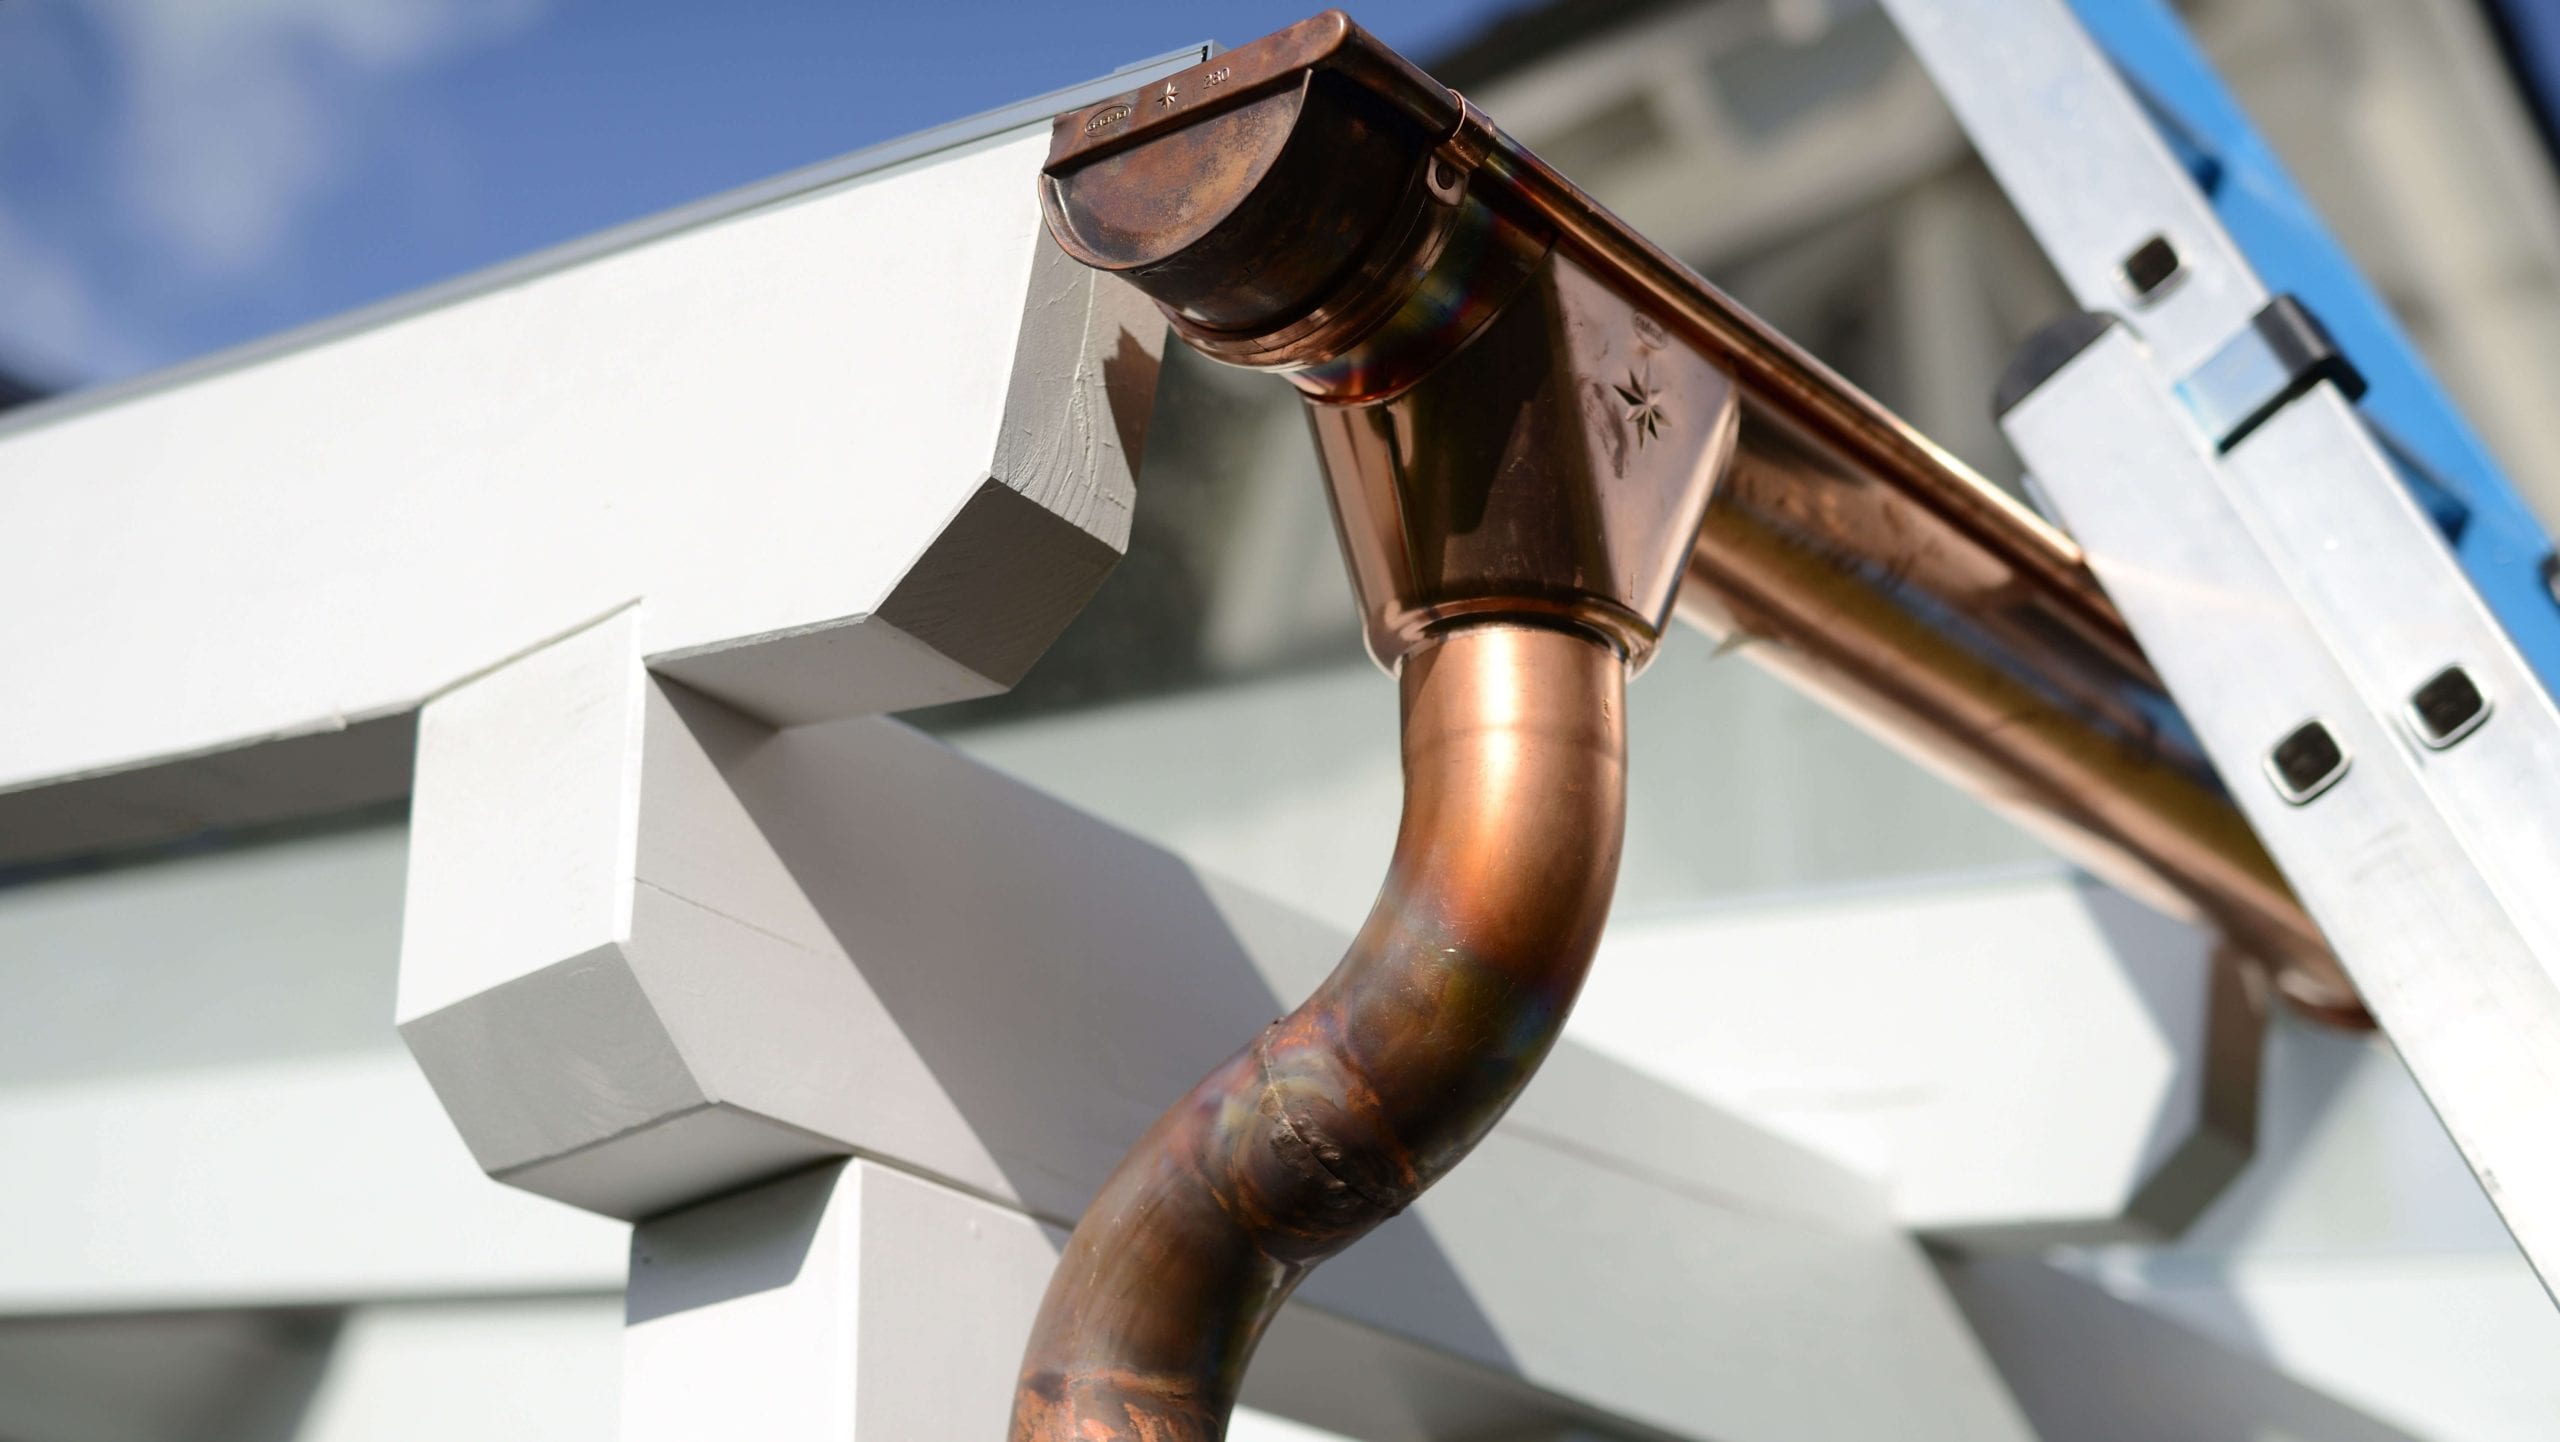 Make your property stand out with copper gutters. Contact for gutter installation in Cincinnati